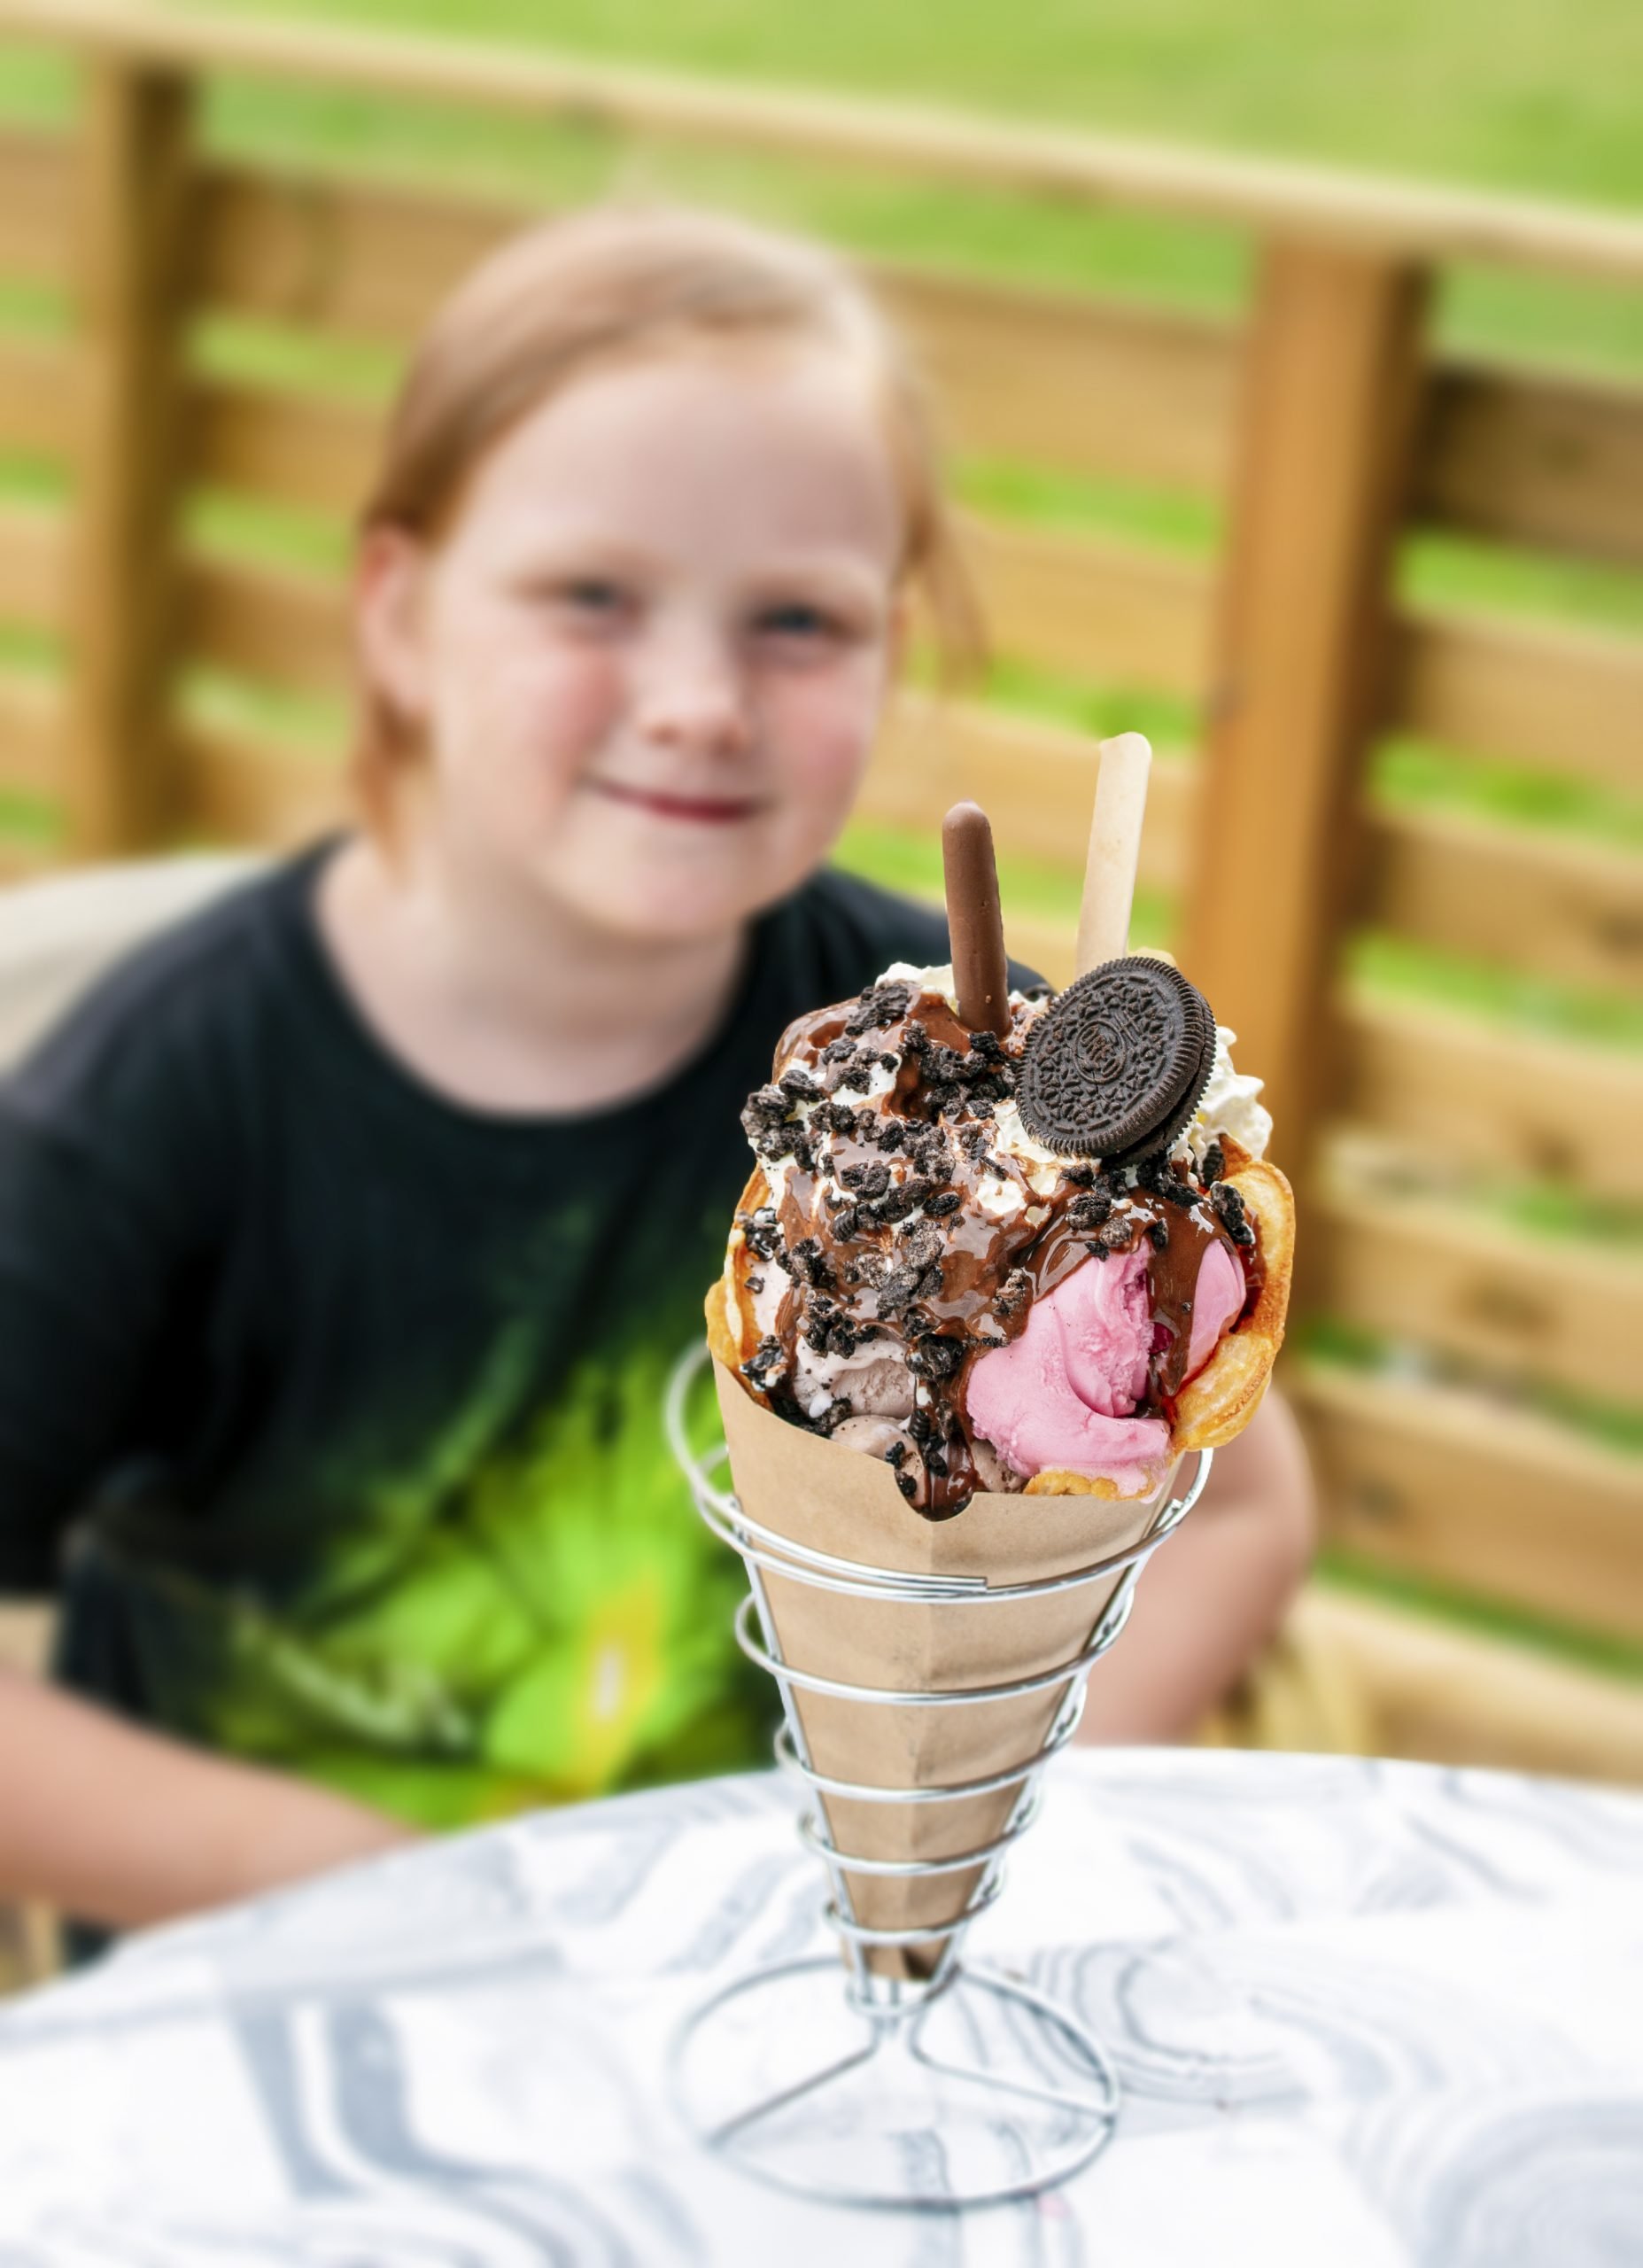 Large scoop of ice cream with children in the background, the Ice Cream Bar in Kosta, Glasriket